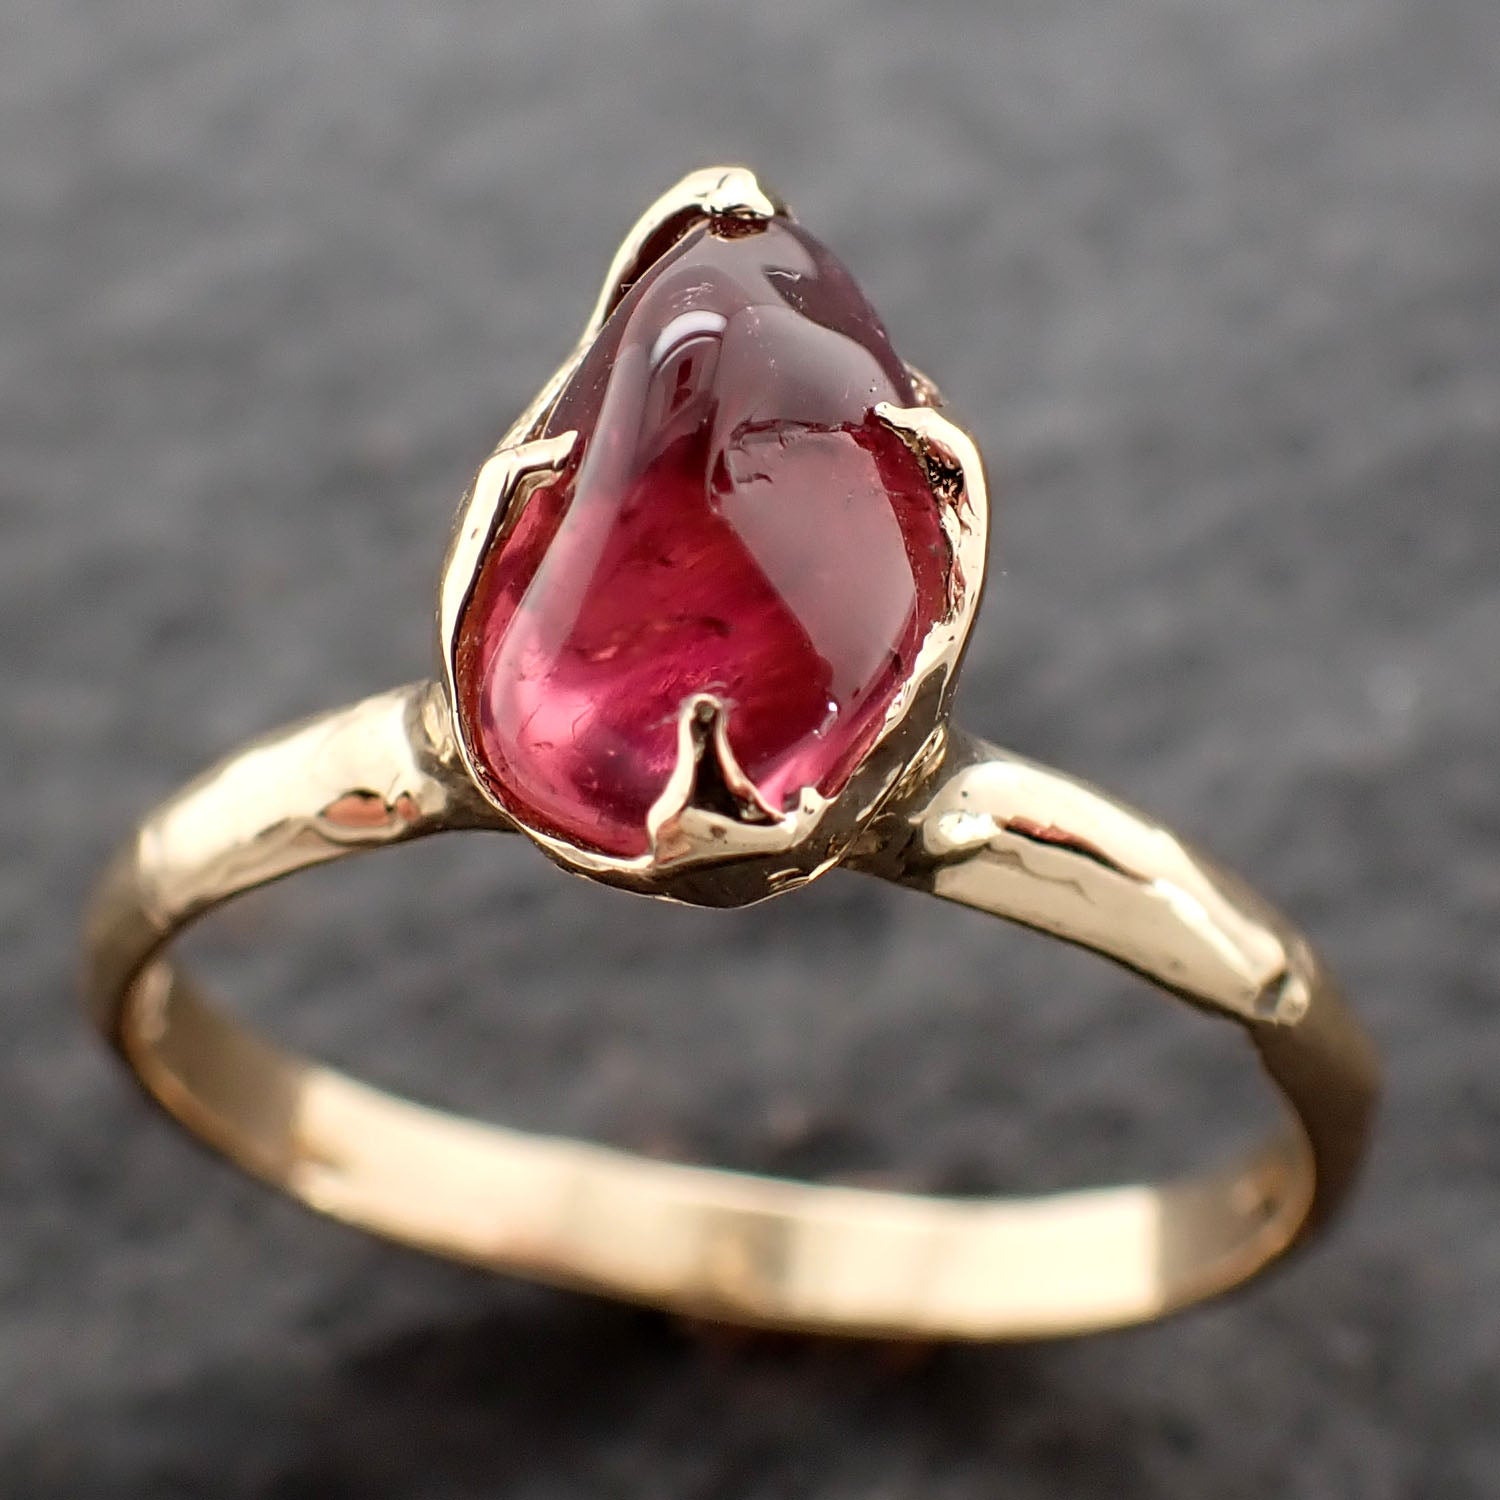 Sapphire Pebble candy pink polished 18k yellow gold Solitaire gemstone ring 2633